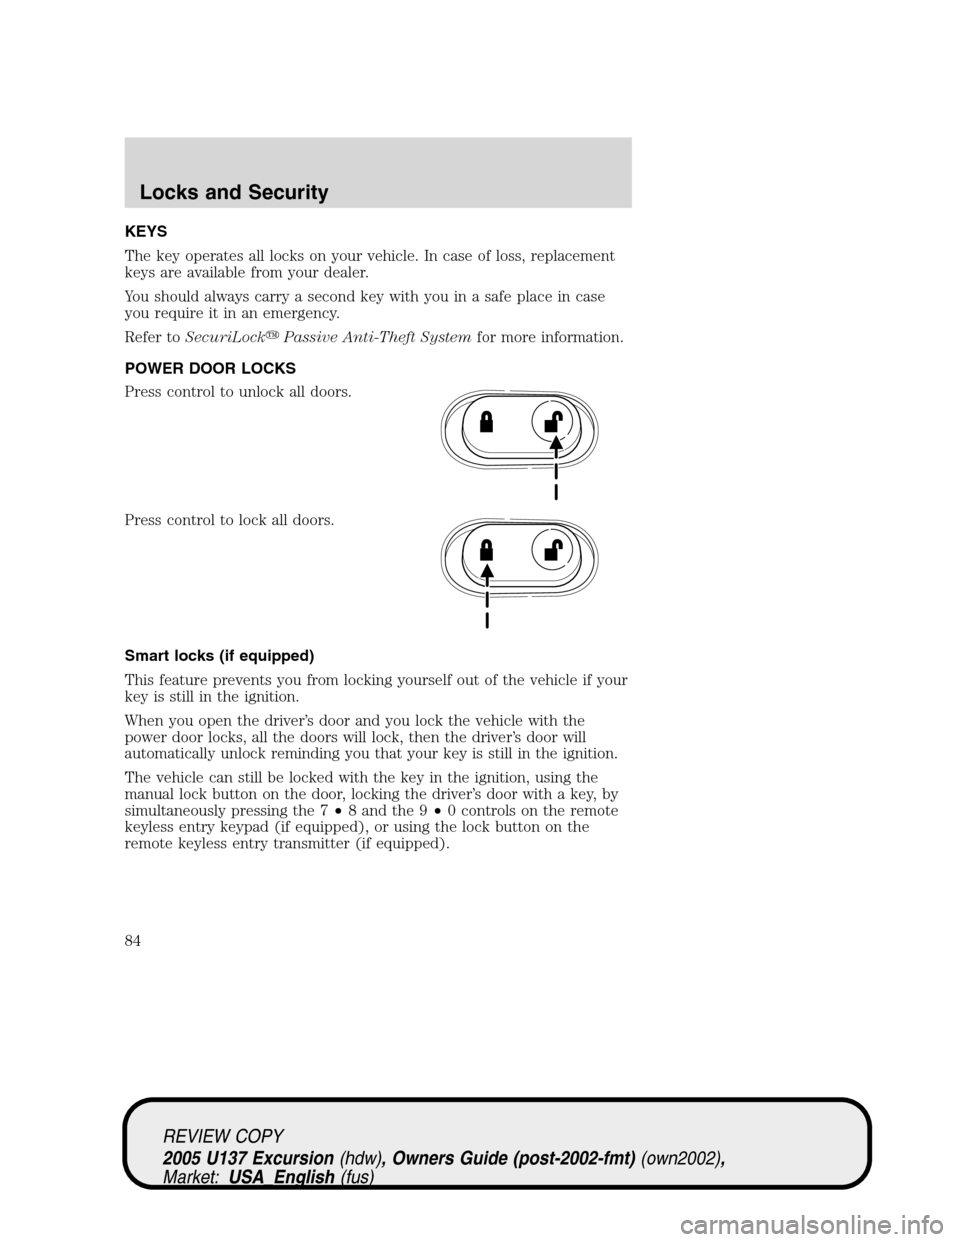 FORD EXCURSION 2005 1.G Owners Manual KEYS
The key operates all locks on your vehicle. In case of loss, replacement
keys are available from your dealer.
You should always carry a second key with you in a safe place in case
you require it 